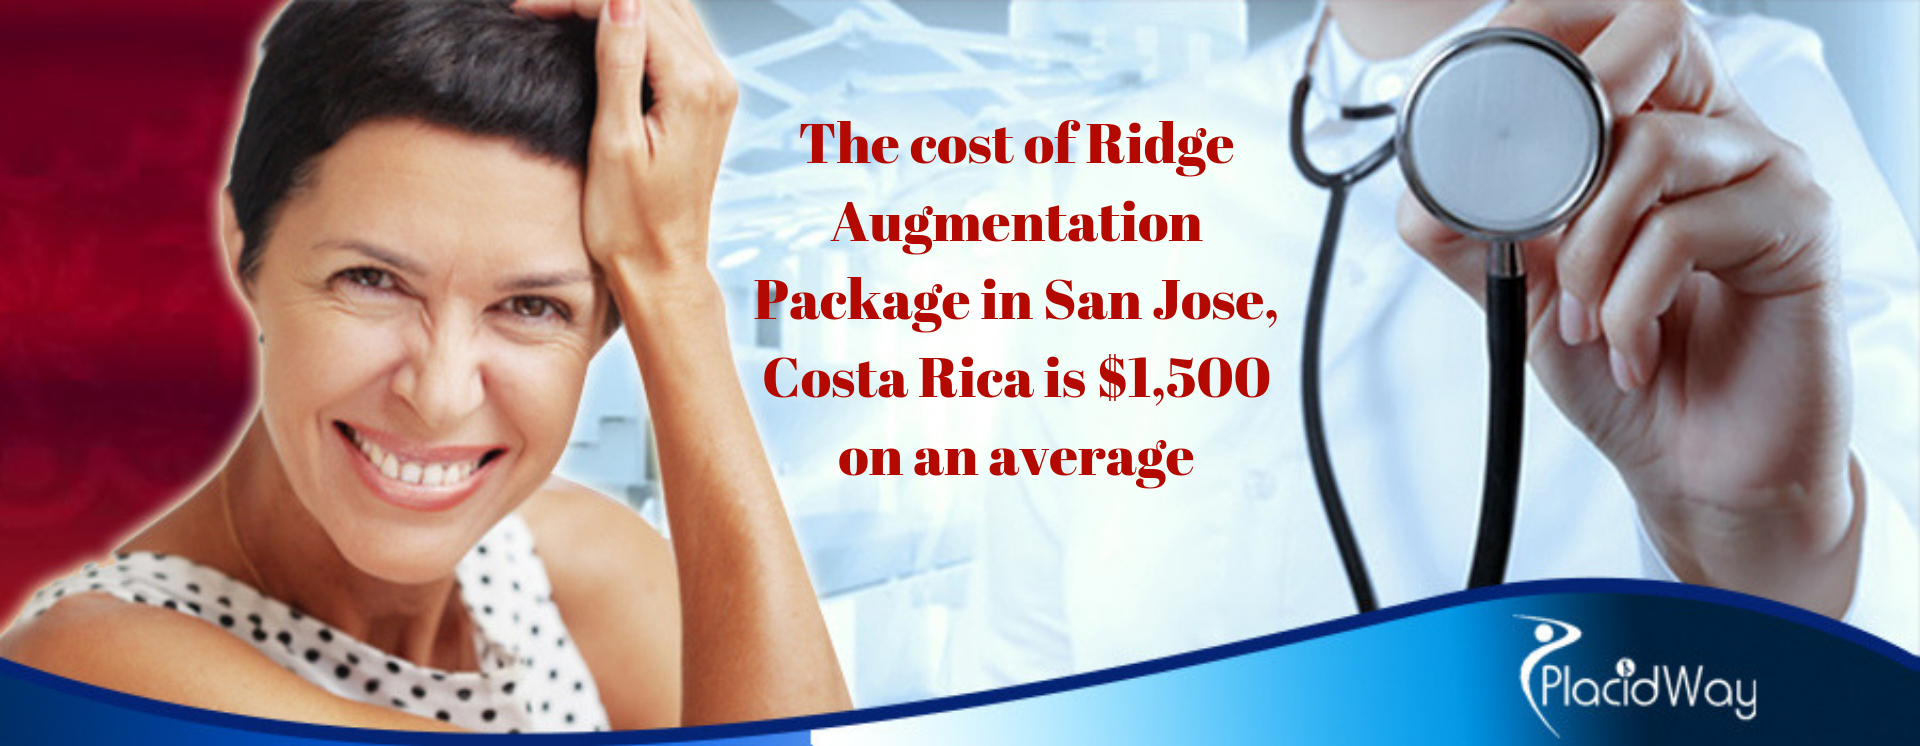 The cost of Ridge Augmentation Package in San Jose, Costa Rica is $1,500 on an average